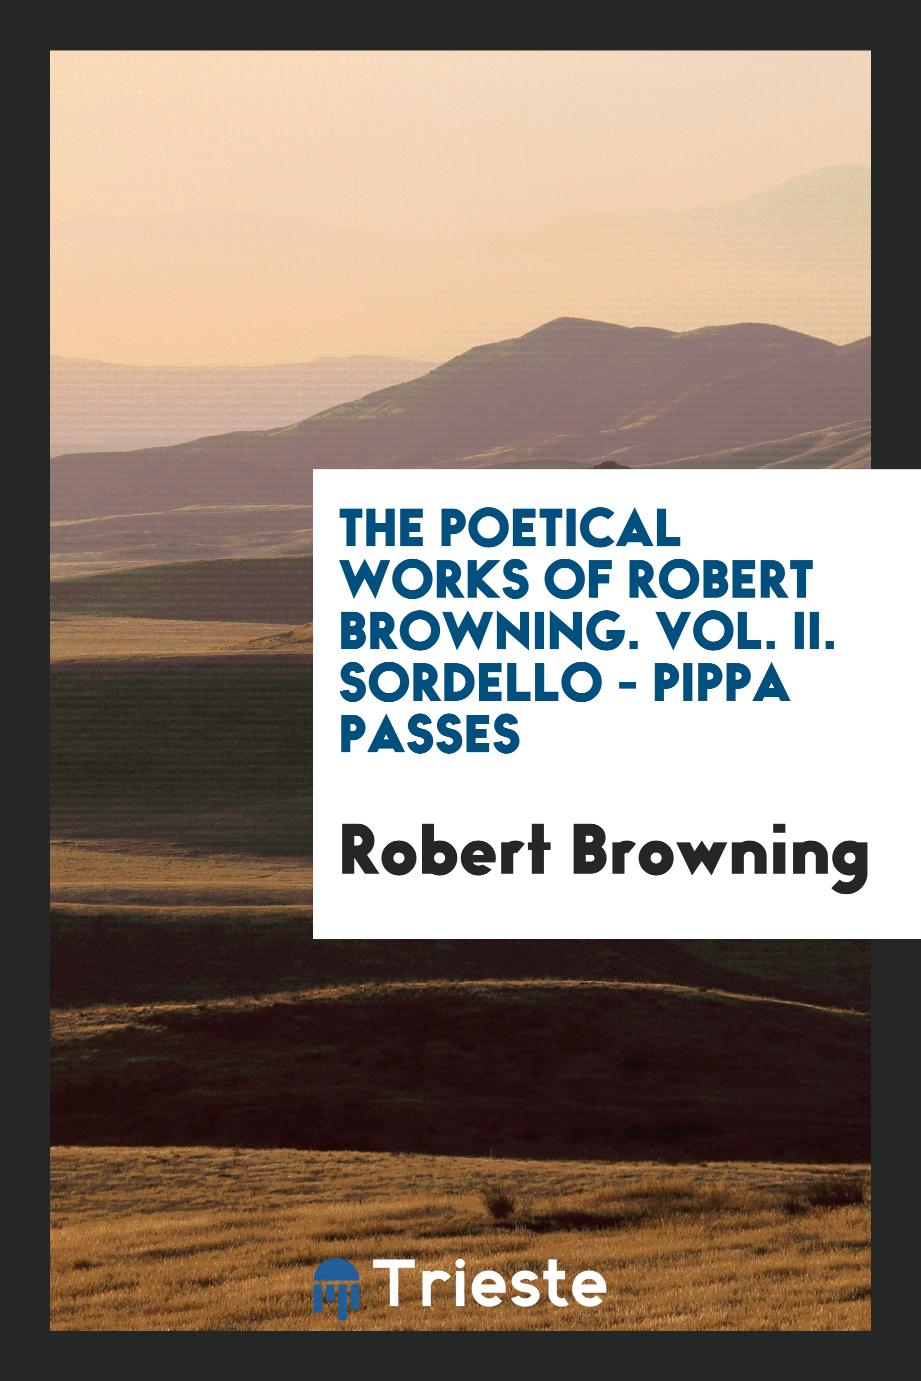 The Poetical Works of Robert Browning. Vol. II. Sordello - Pippa Passes